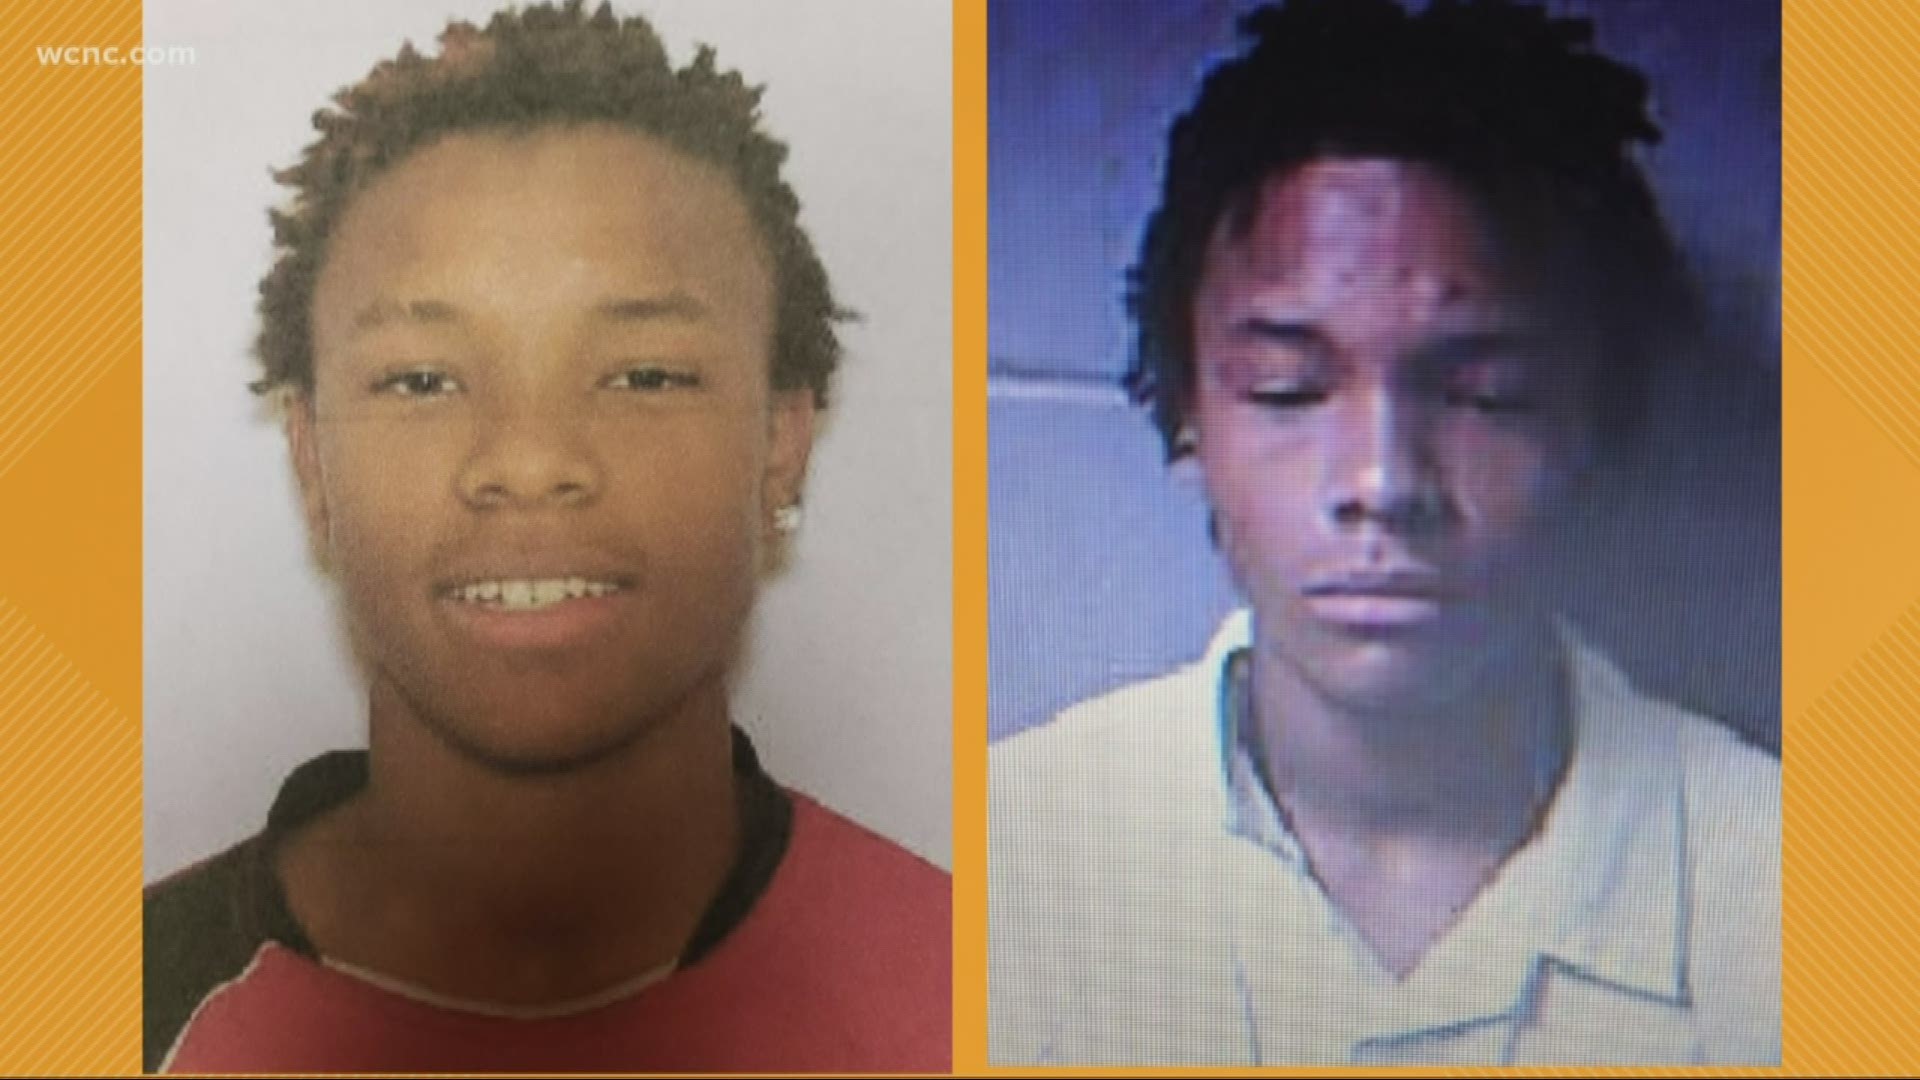 Police in South Carolina are searching for a 19-year-old accused of murdering a man in Cheraw earlier this month.